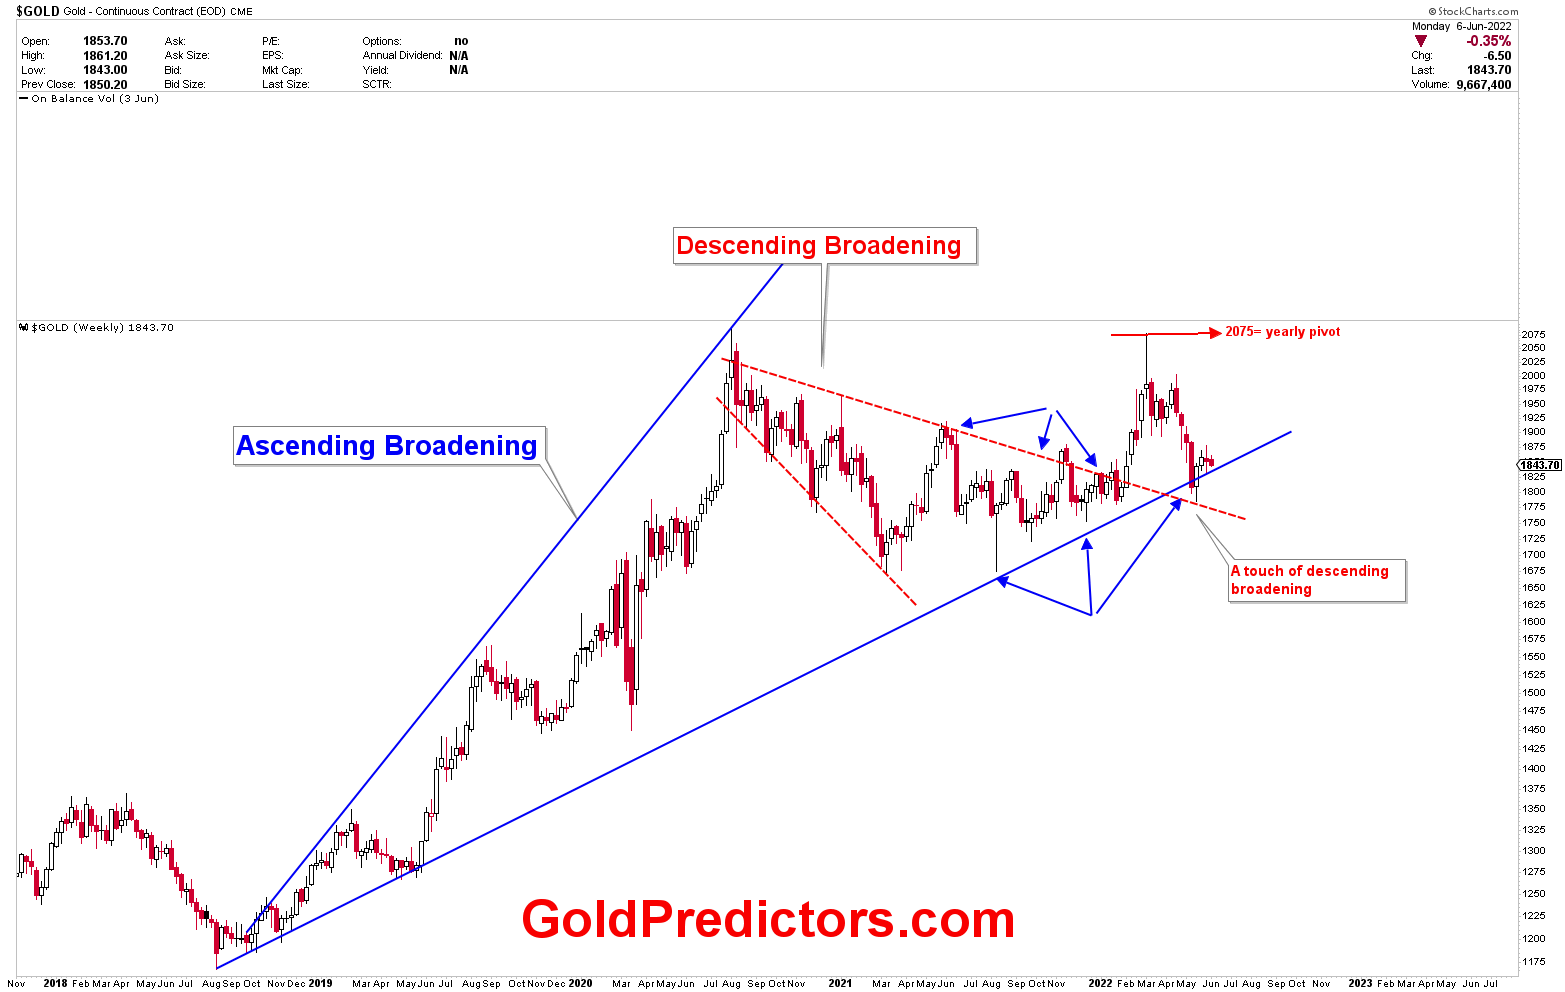 A Significant Liquidation Event in Gold